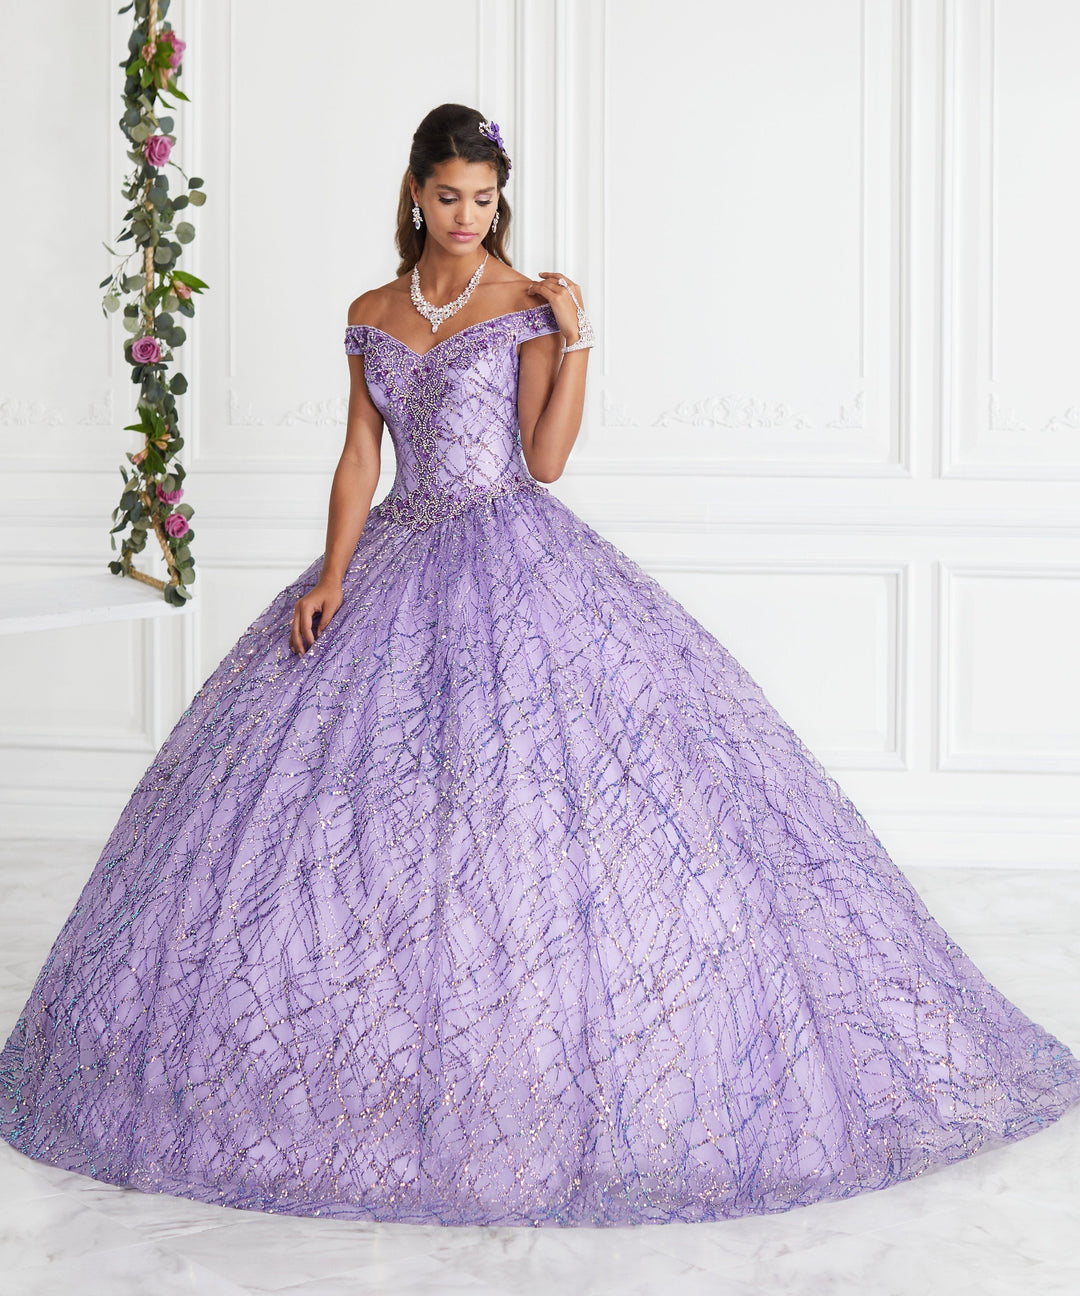 Off Shoulder Glitter Quinceanera Dress by House of Wu 26944-Quinceanera Dresses-ABC Fashion